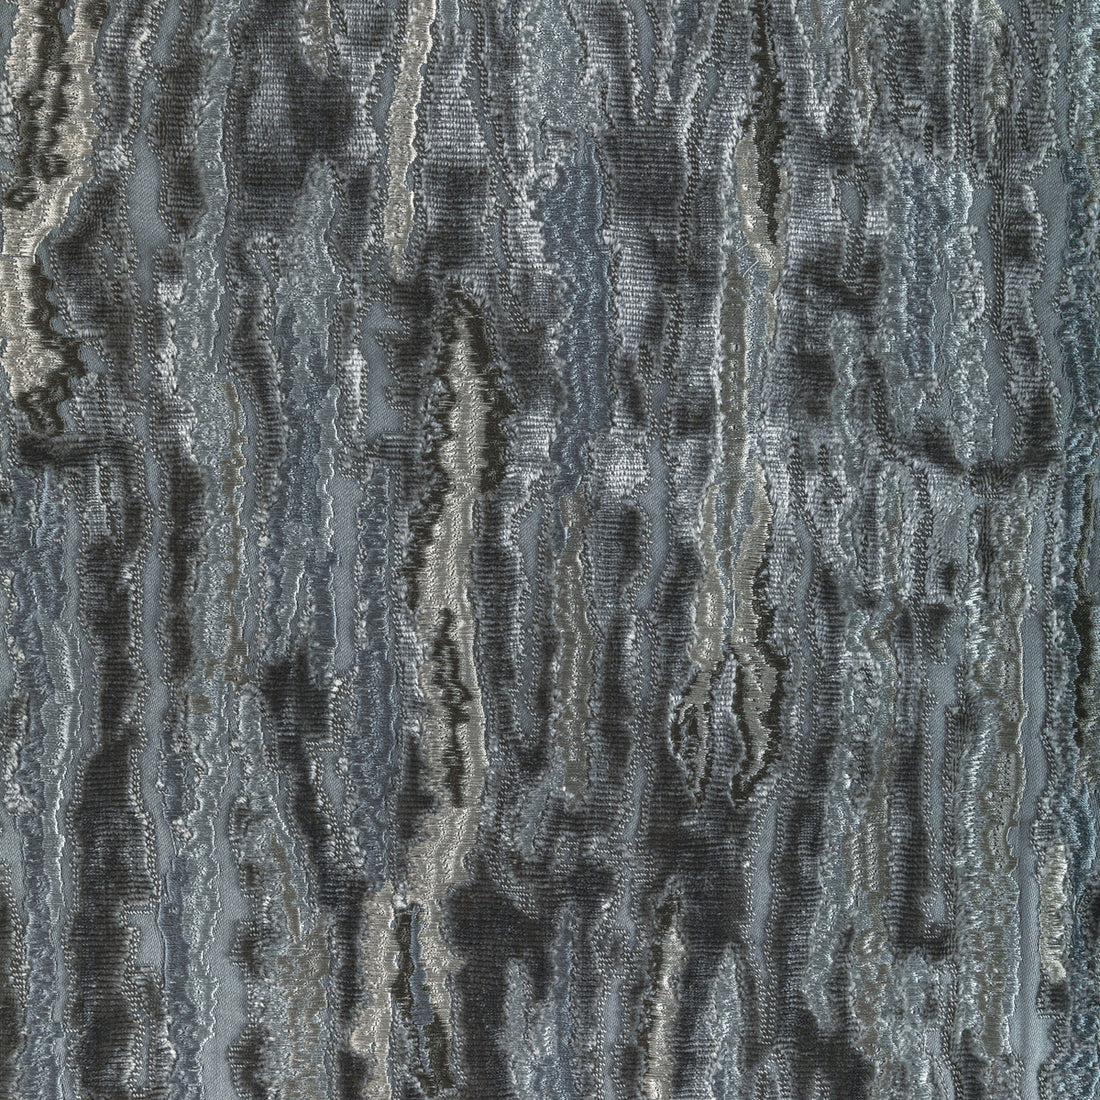 Velvet Waves fabric in charcoal color - pattern 36322.21.0 - by Kravet Couture in the Modern Luxe III collection